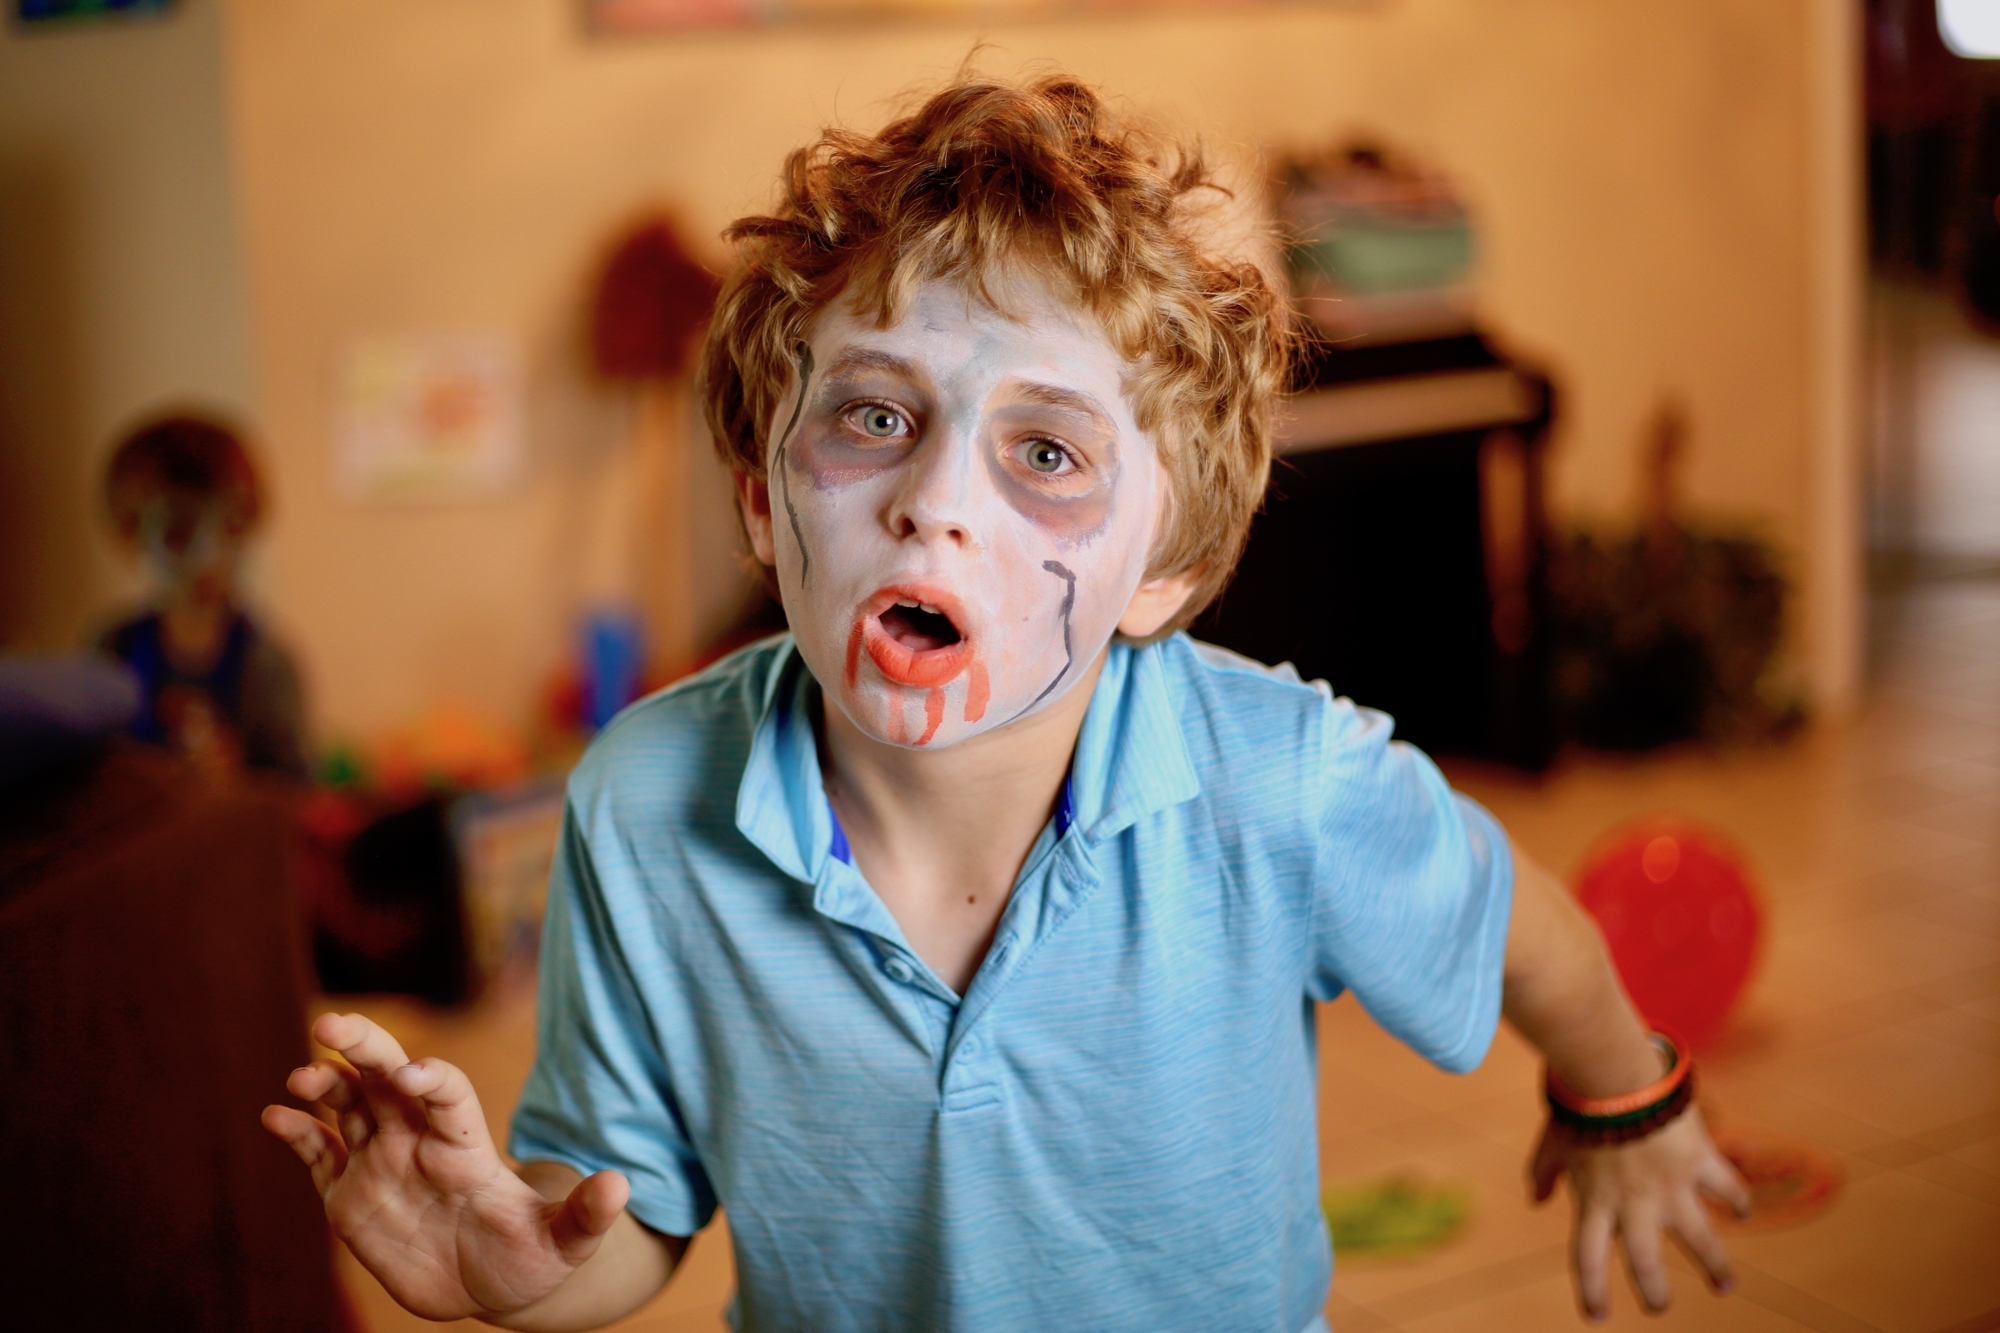 Felix Ratner designed the zombie makeup for him and his brother, Alfie. It's part ofthe creative fun kids can have shooting their scenes. (Photos courtesy of Paul Ratner)